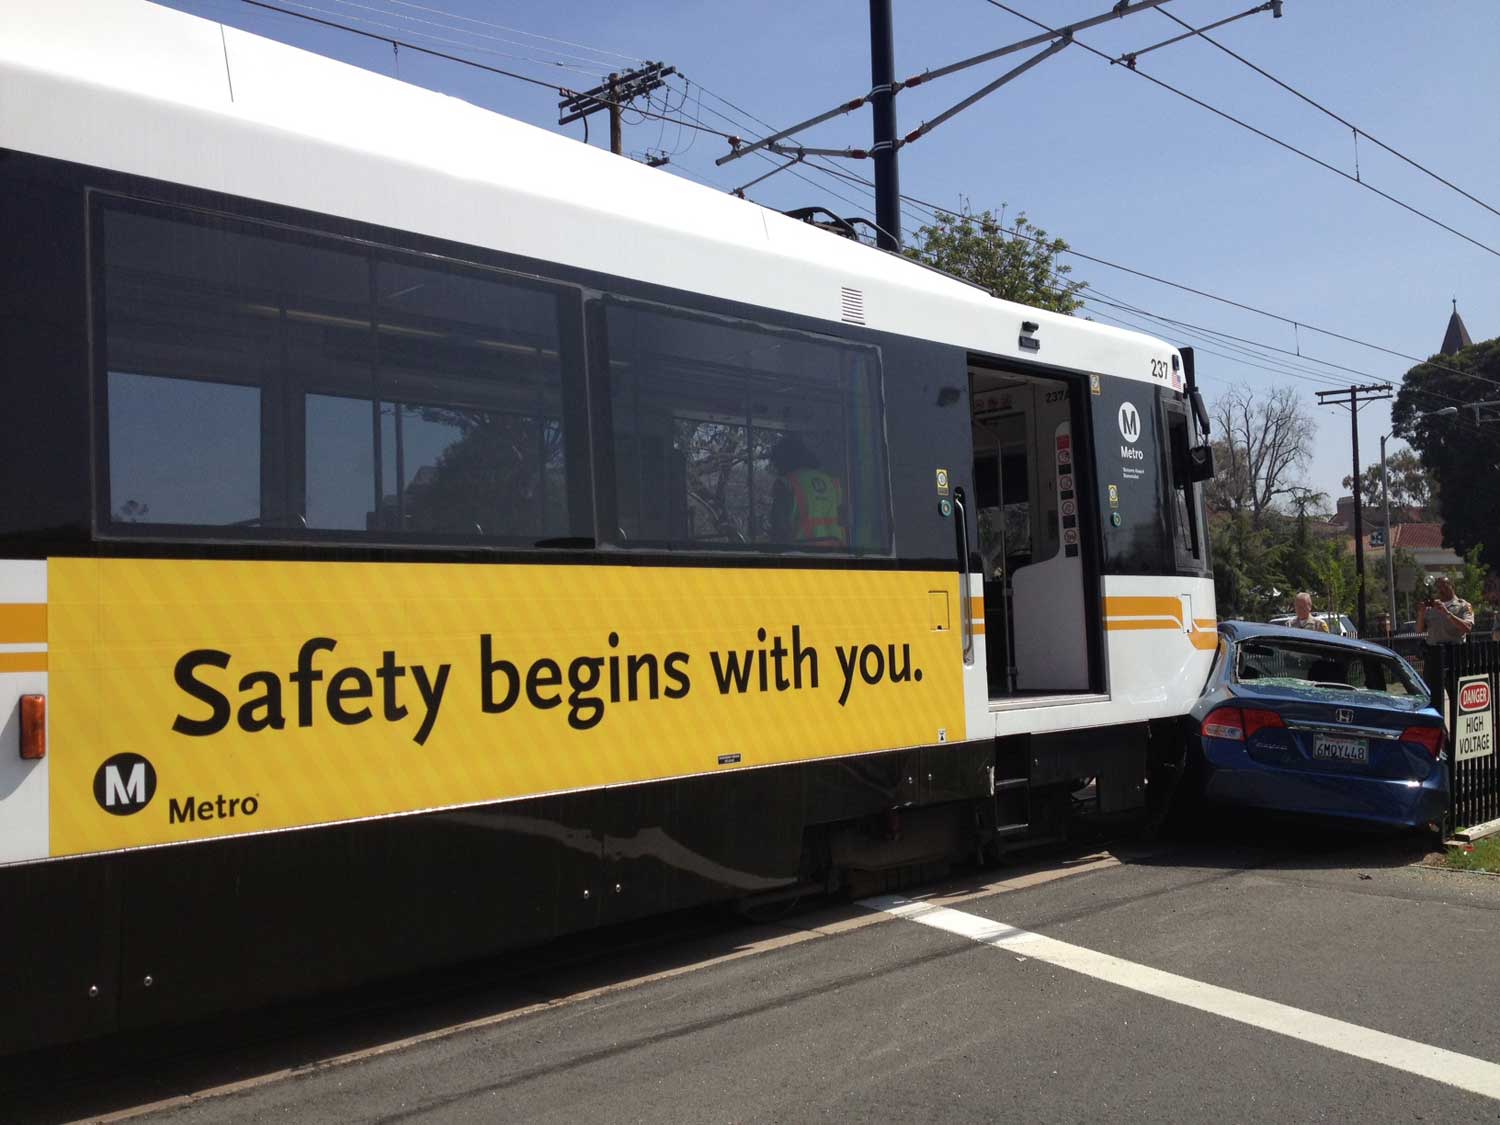 most ironic - Safety begins with you. Mdylls M Metro